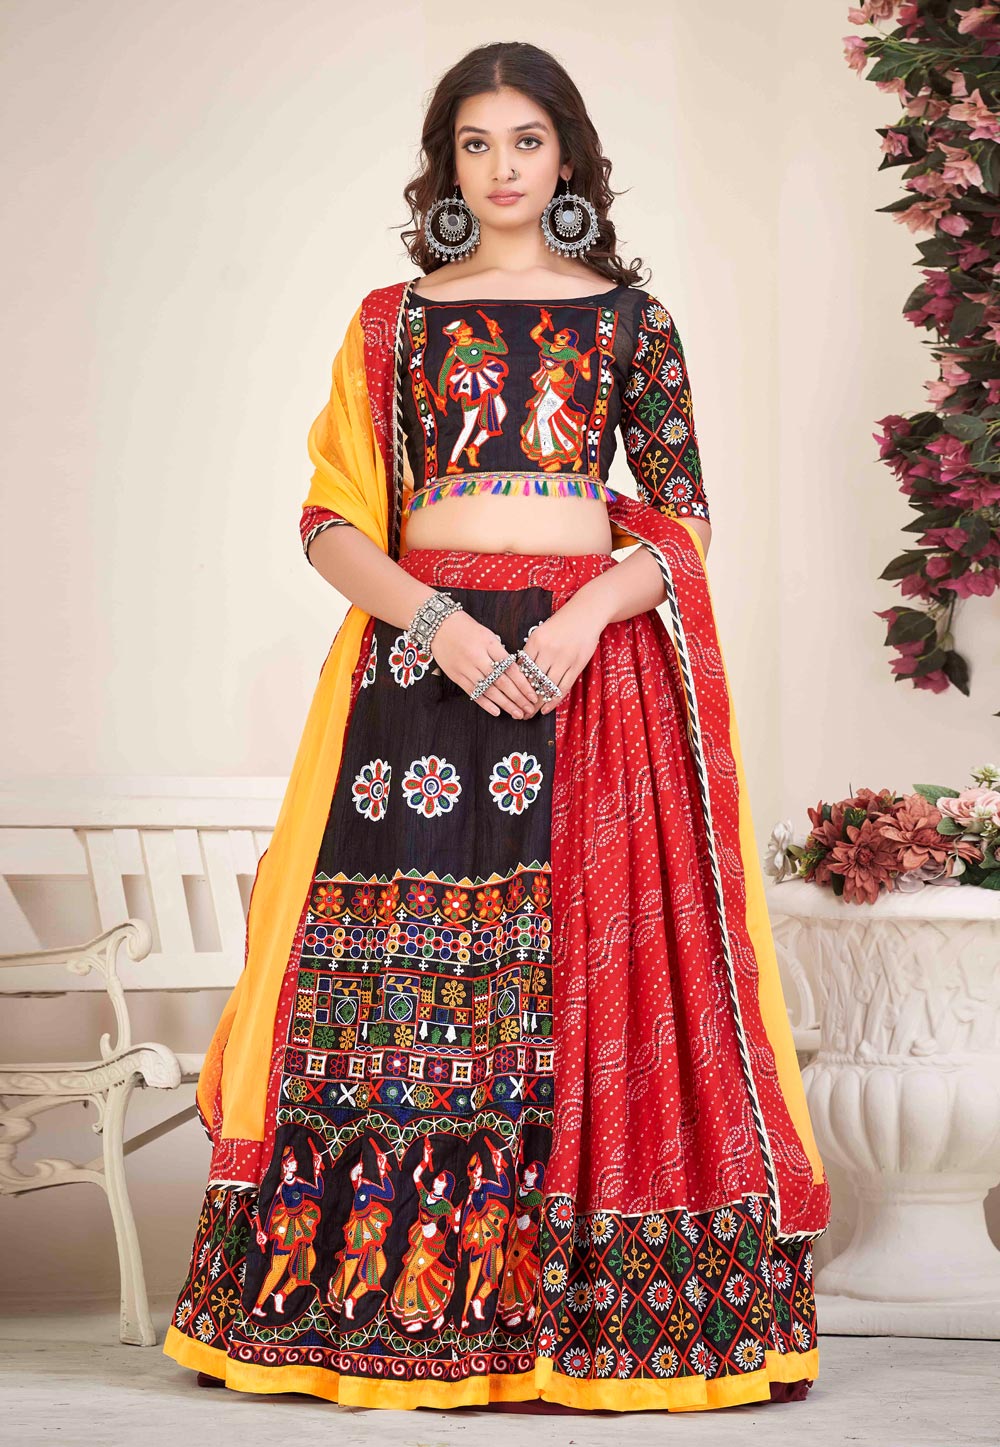 What is the difference between a ghagra choli and a lehenga? - Quora